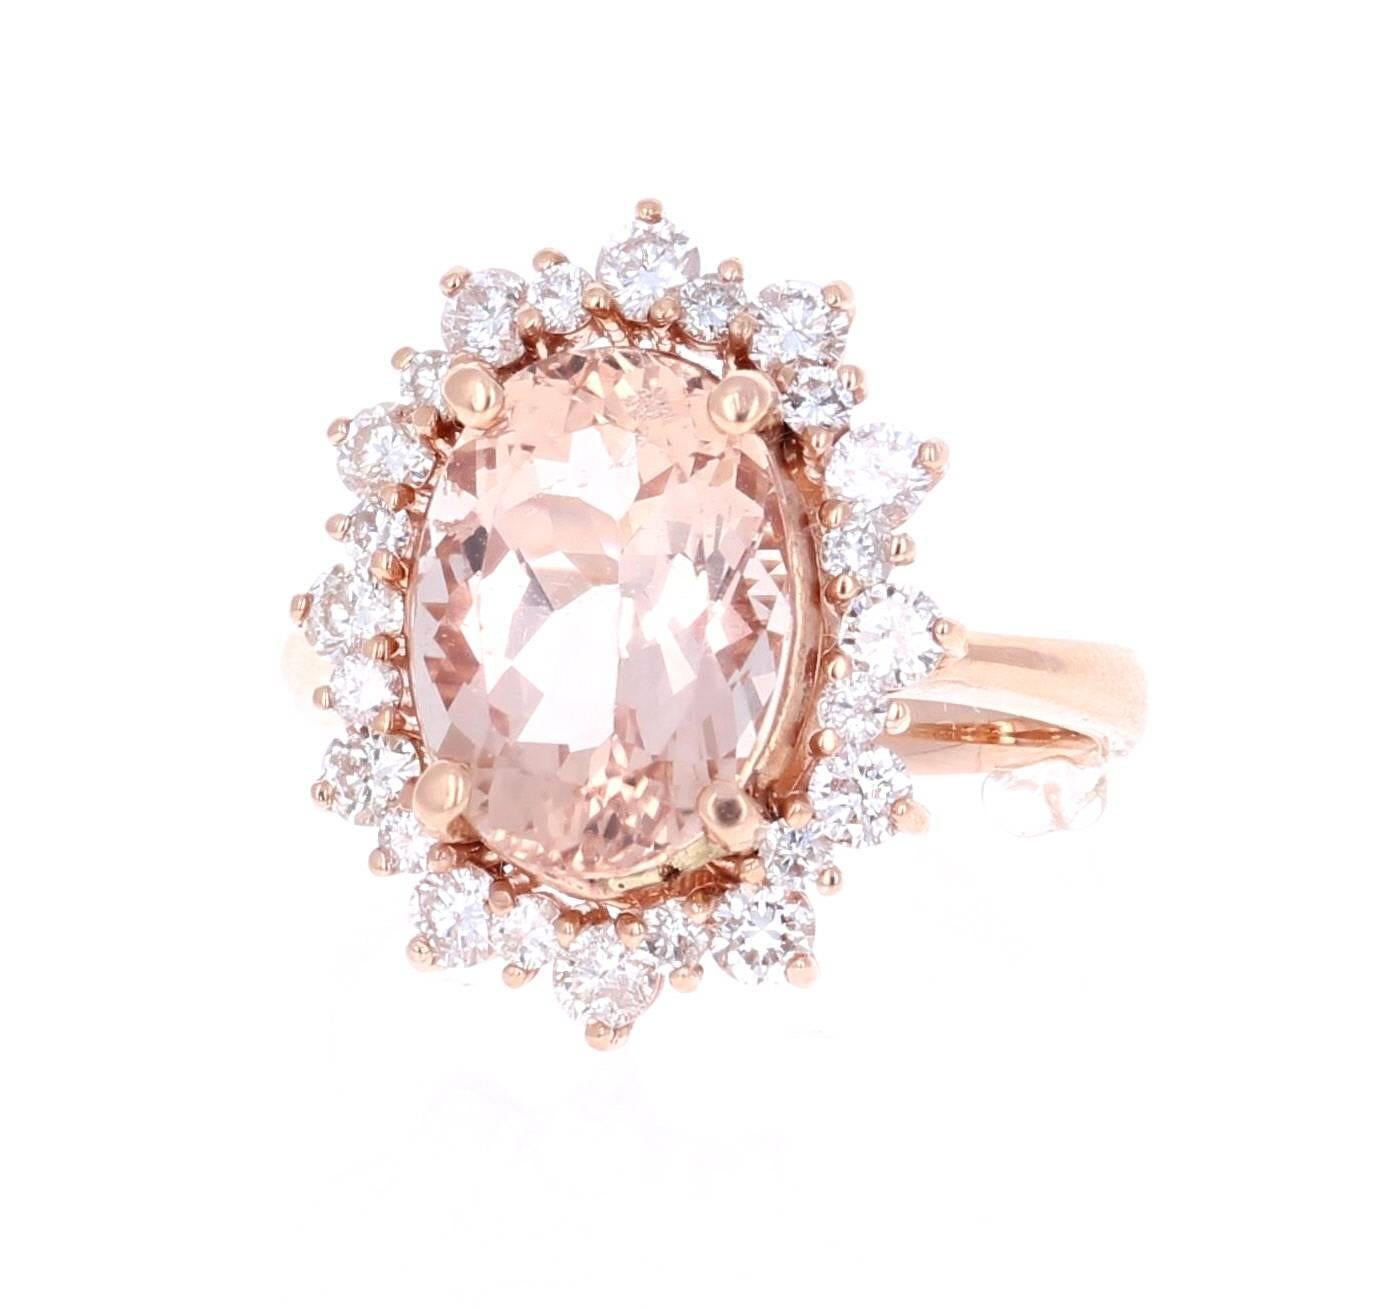 This classic Morganite Ring has an Oval Cut 4.49 Carat Morganite (9.5mm x 12.5mm) as its center and is surrounded by 24 Round Cut Diamonds that weigh 1.03 Carats. The clarity and color of the diamonds are SI-F. The total carat weight of the ring is